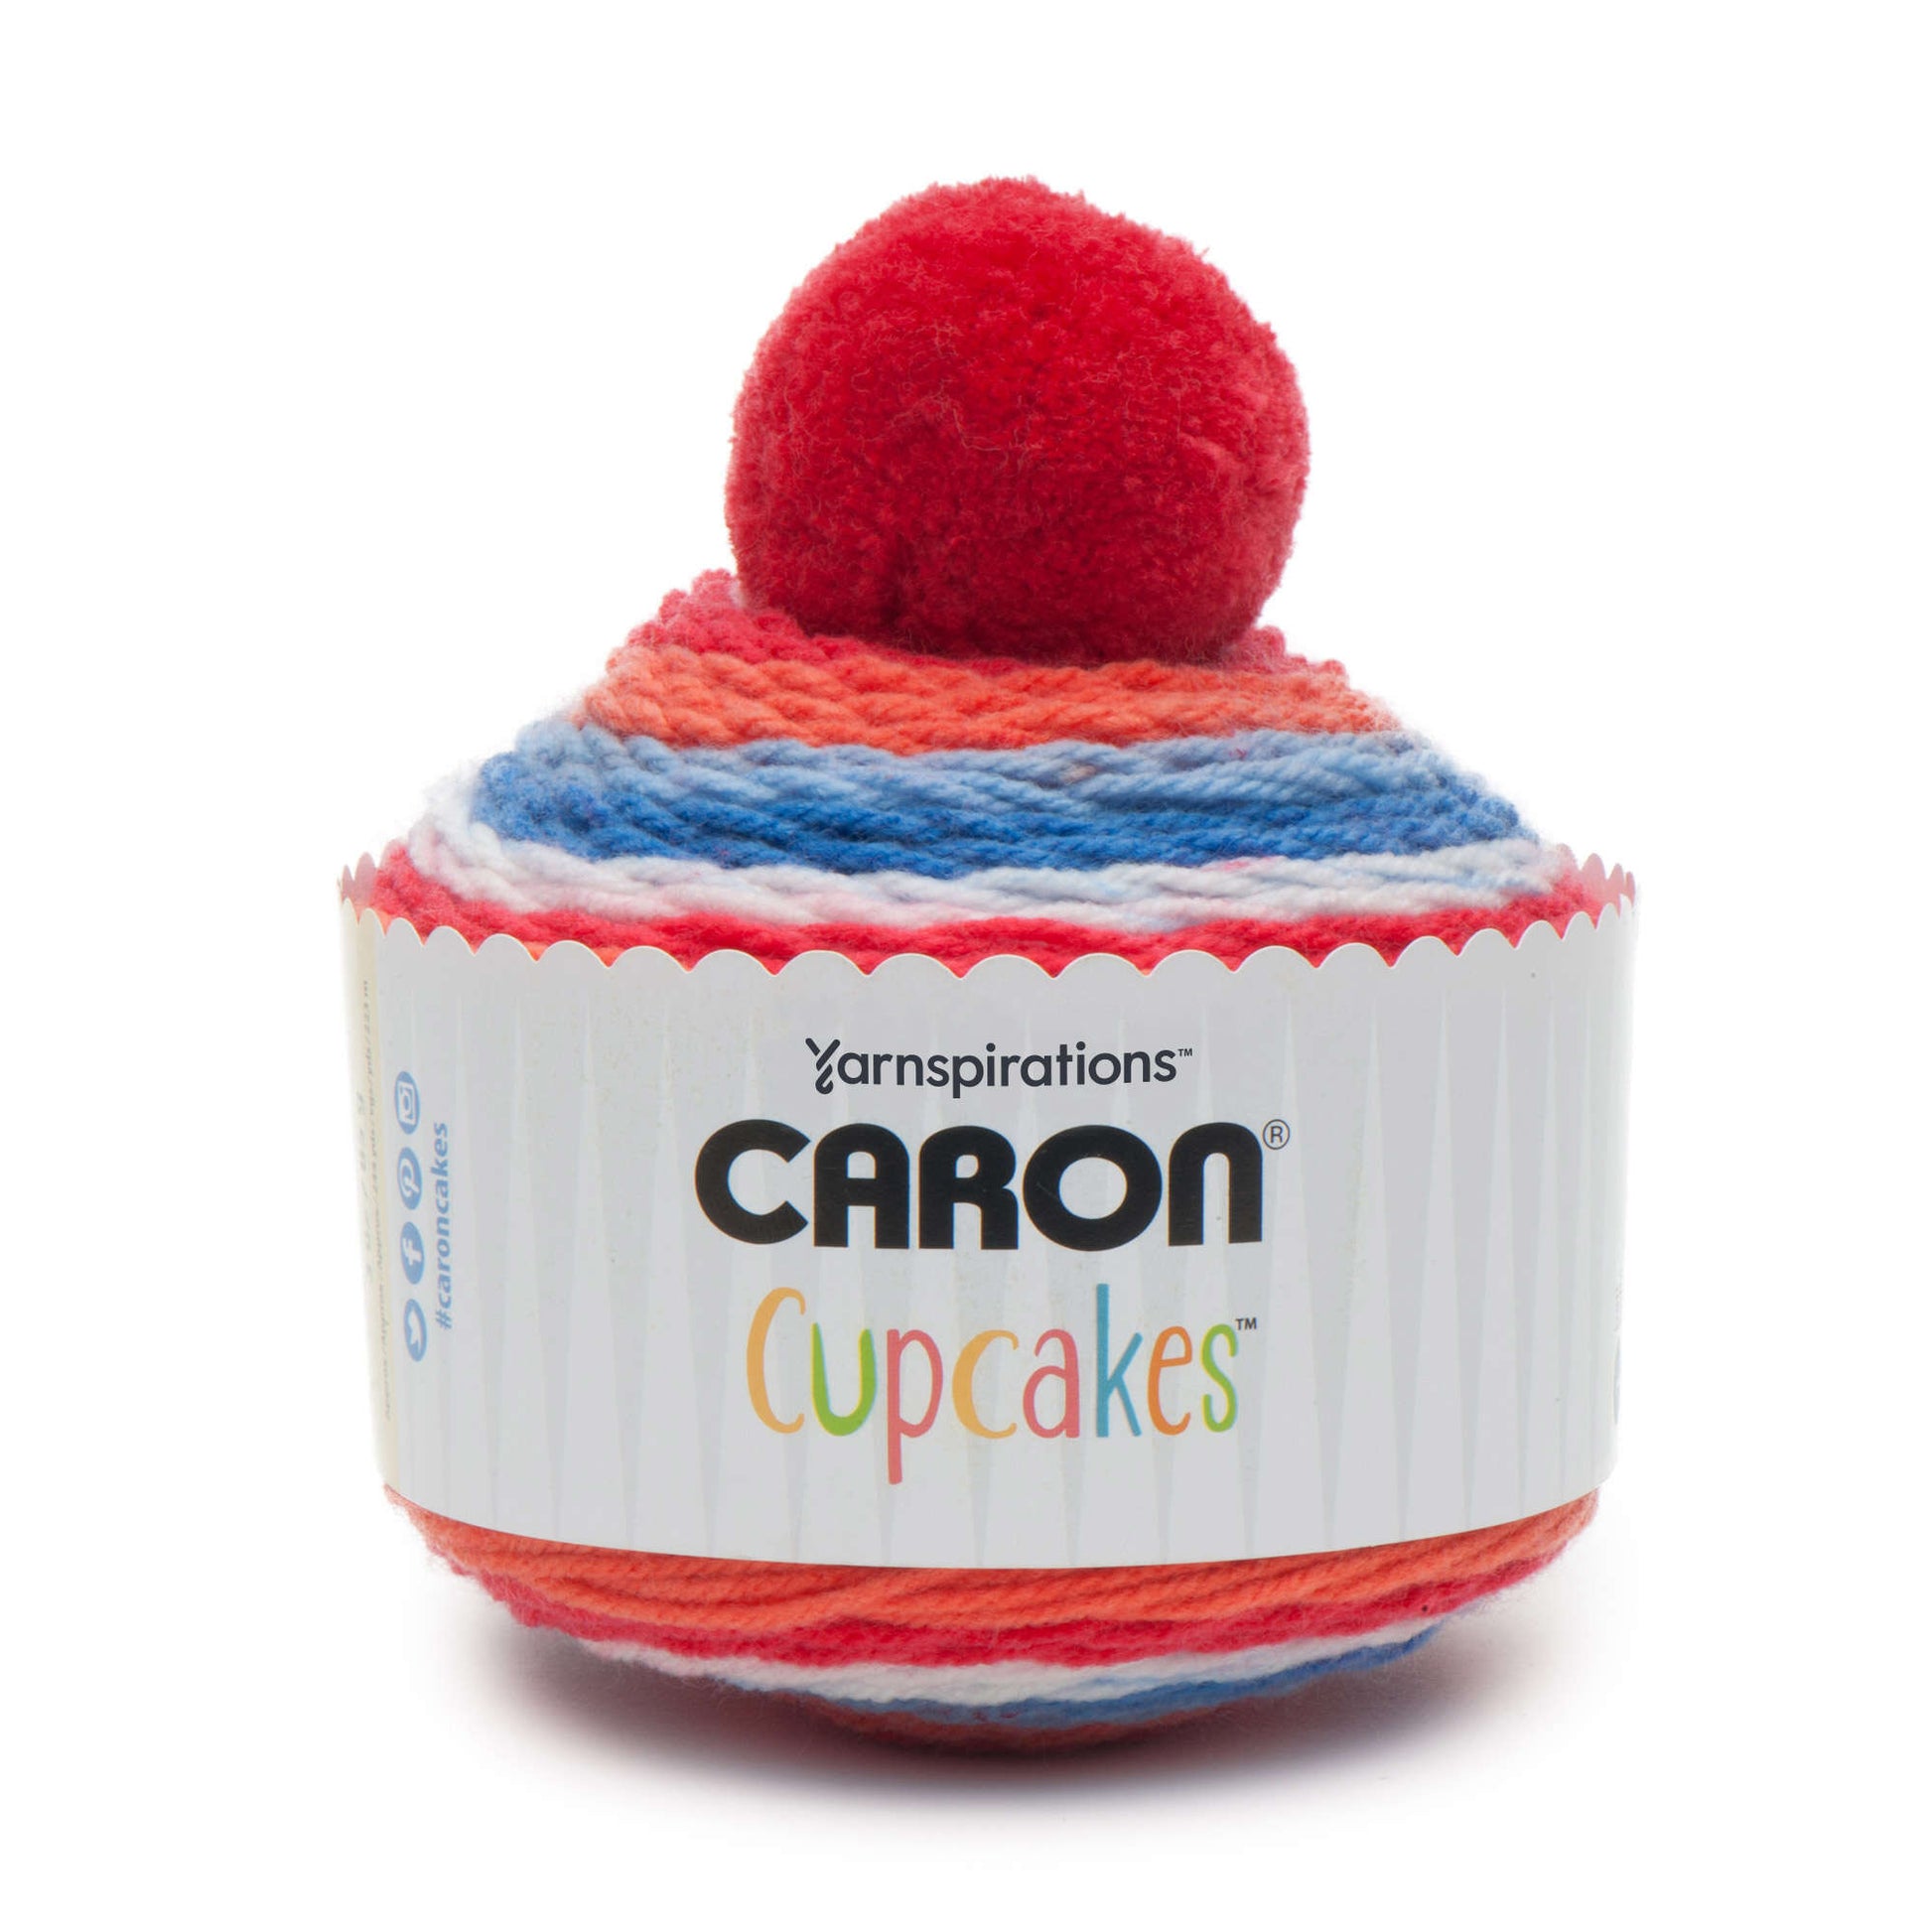 Caron Cupcakes Yarn - Discontinued Shades Cherry on Top